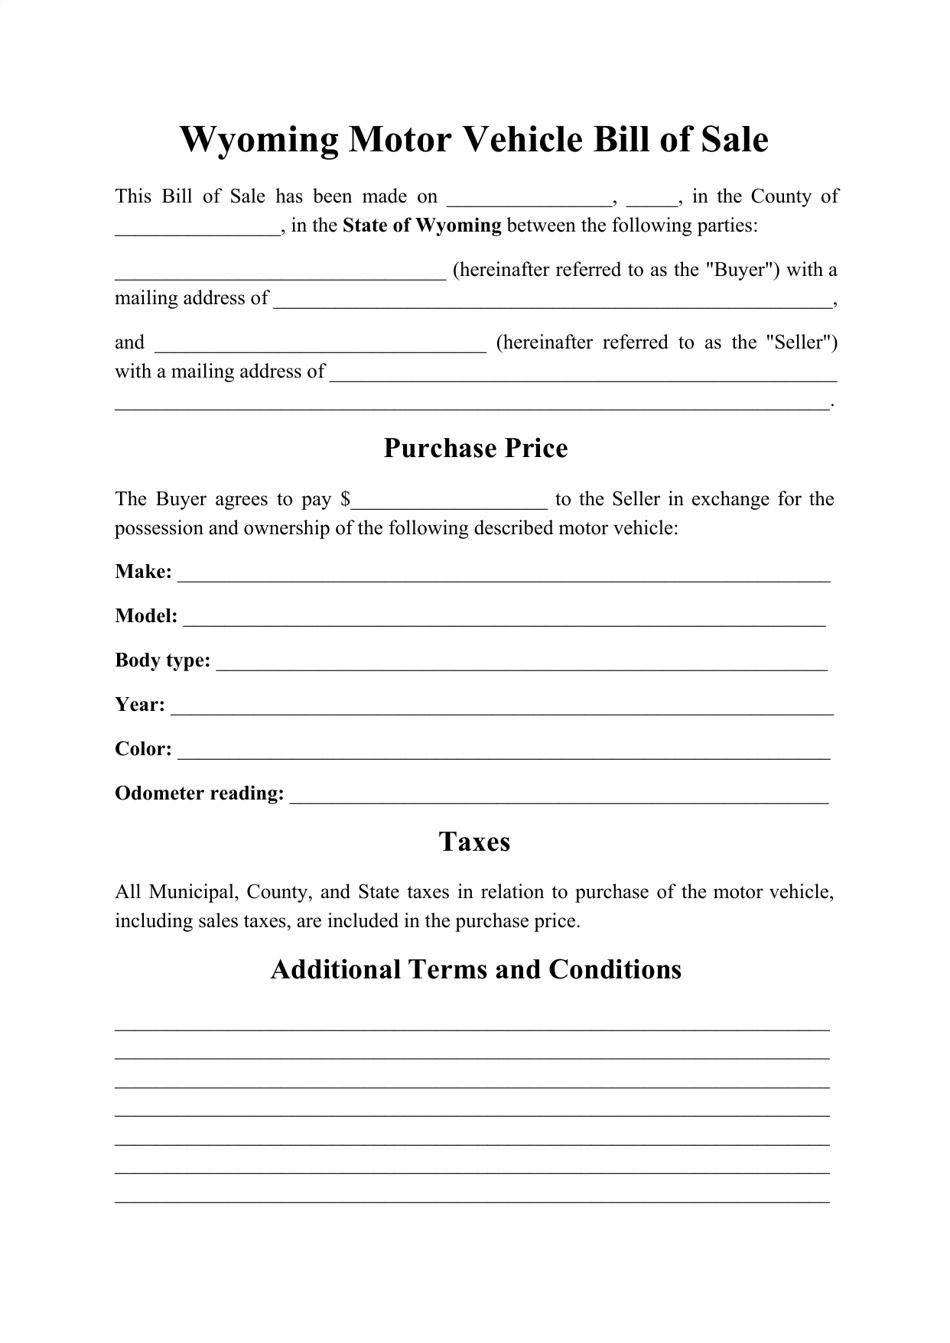 Motor Vehicle Bill of Sale Form - Wyoming, Page 1